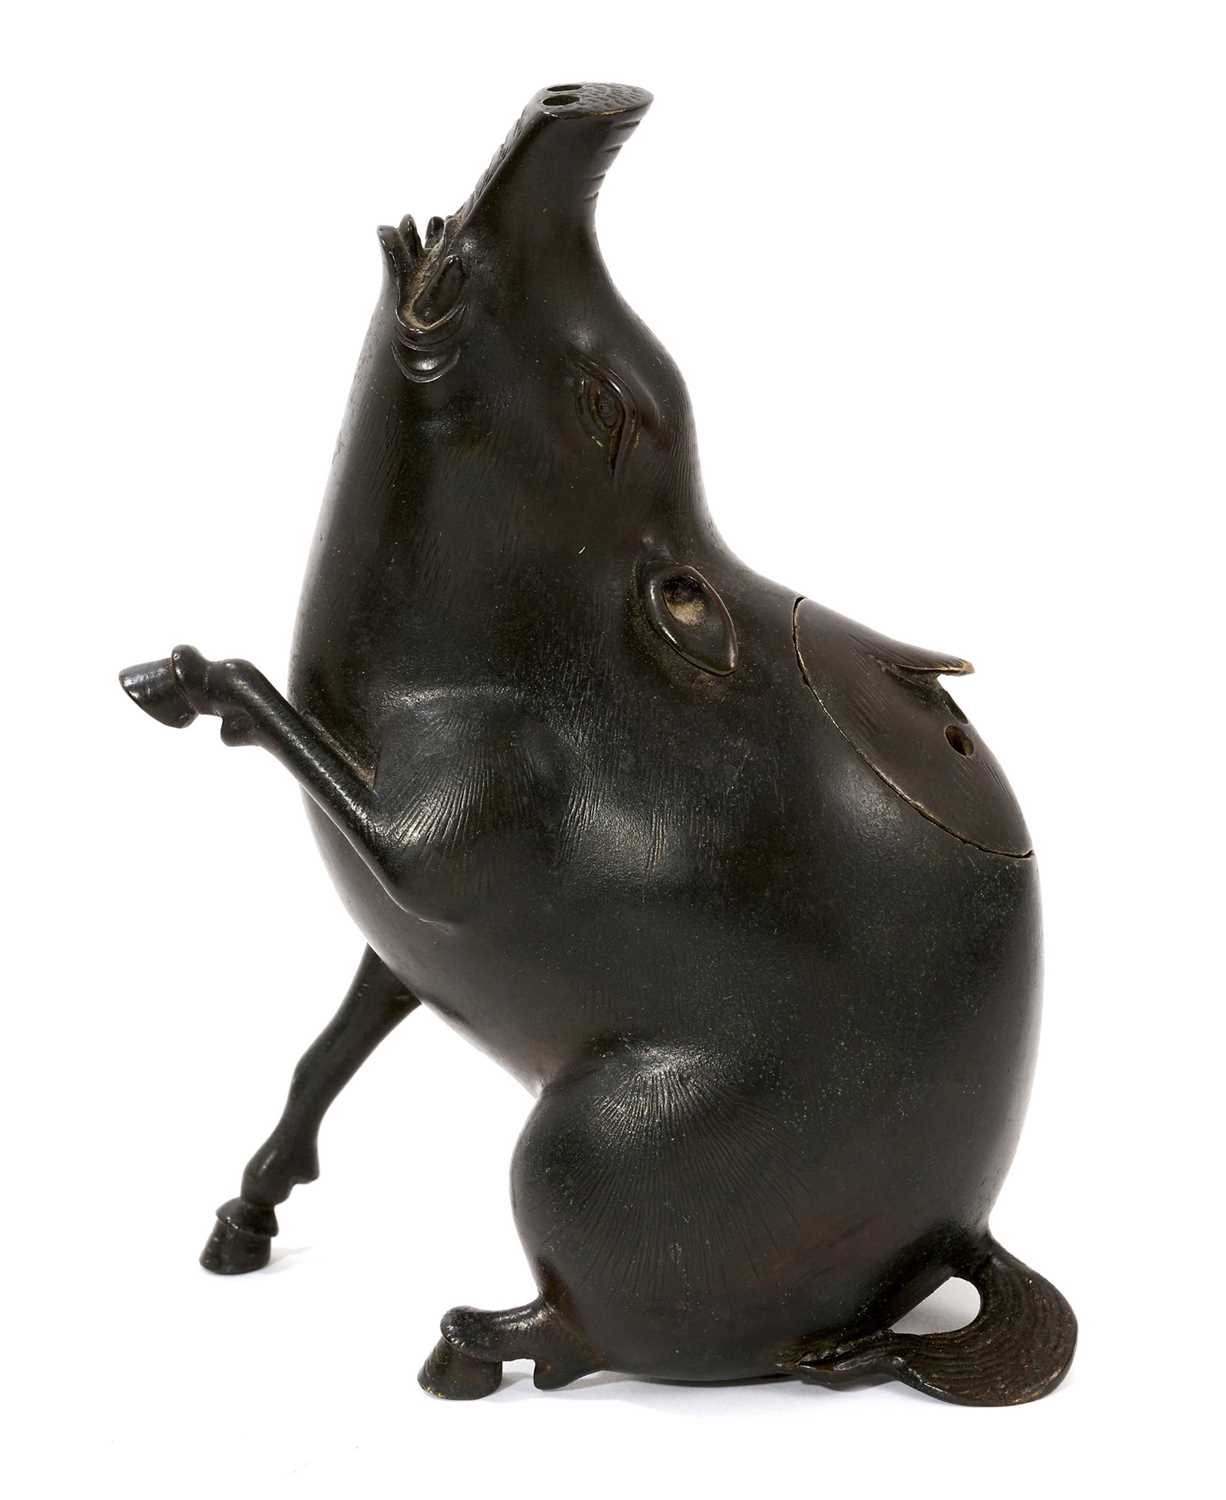 19th century Japanese bronze censer in the form of a seated boar